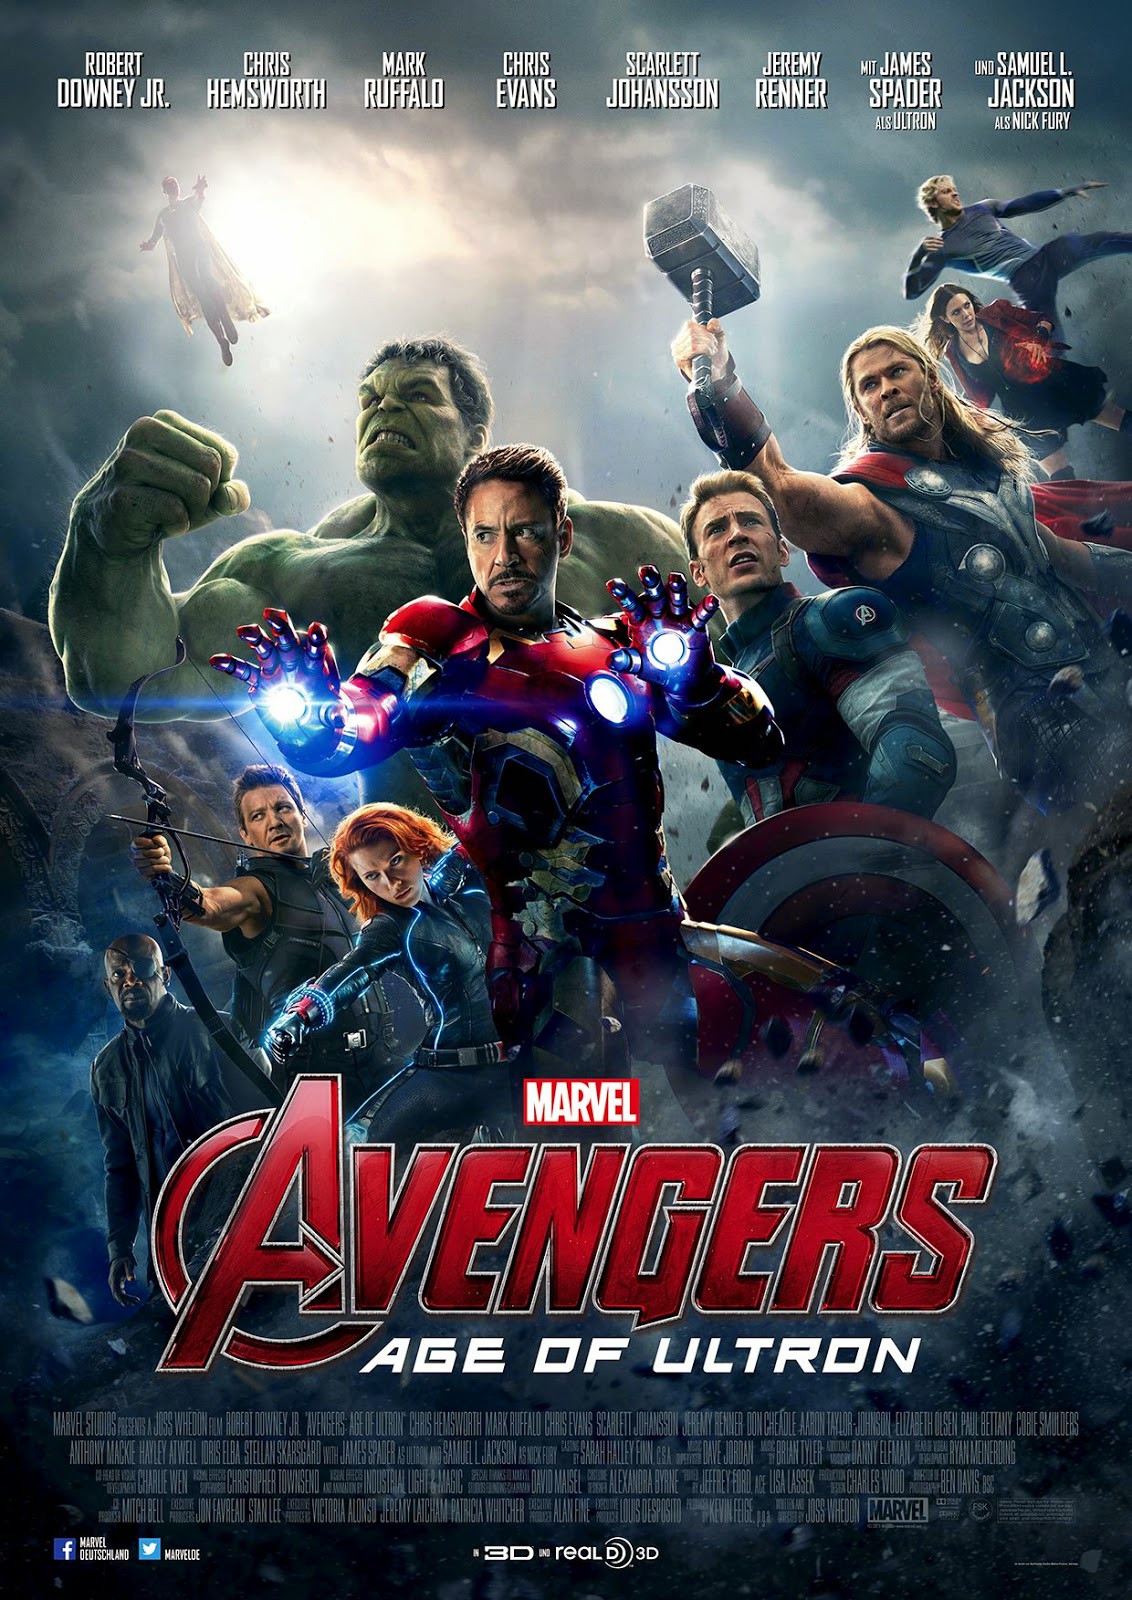 Fangirl Review: Movie Review: Avengers: Age of Ultron